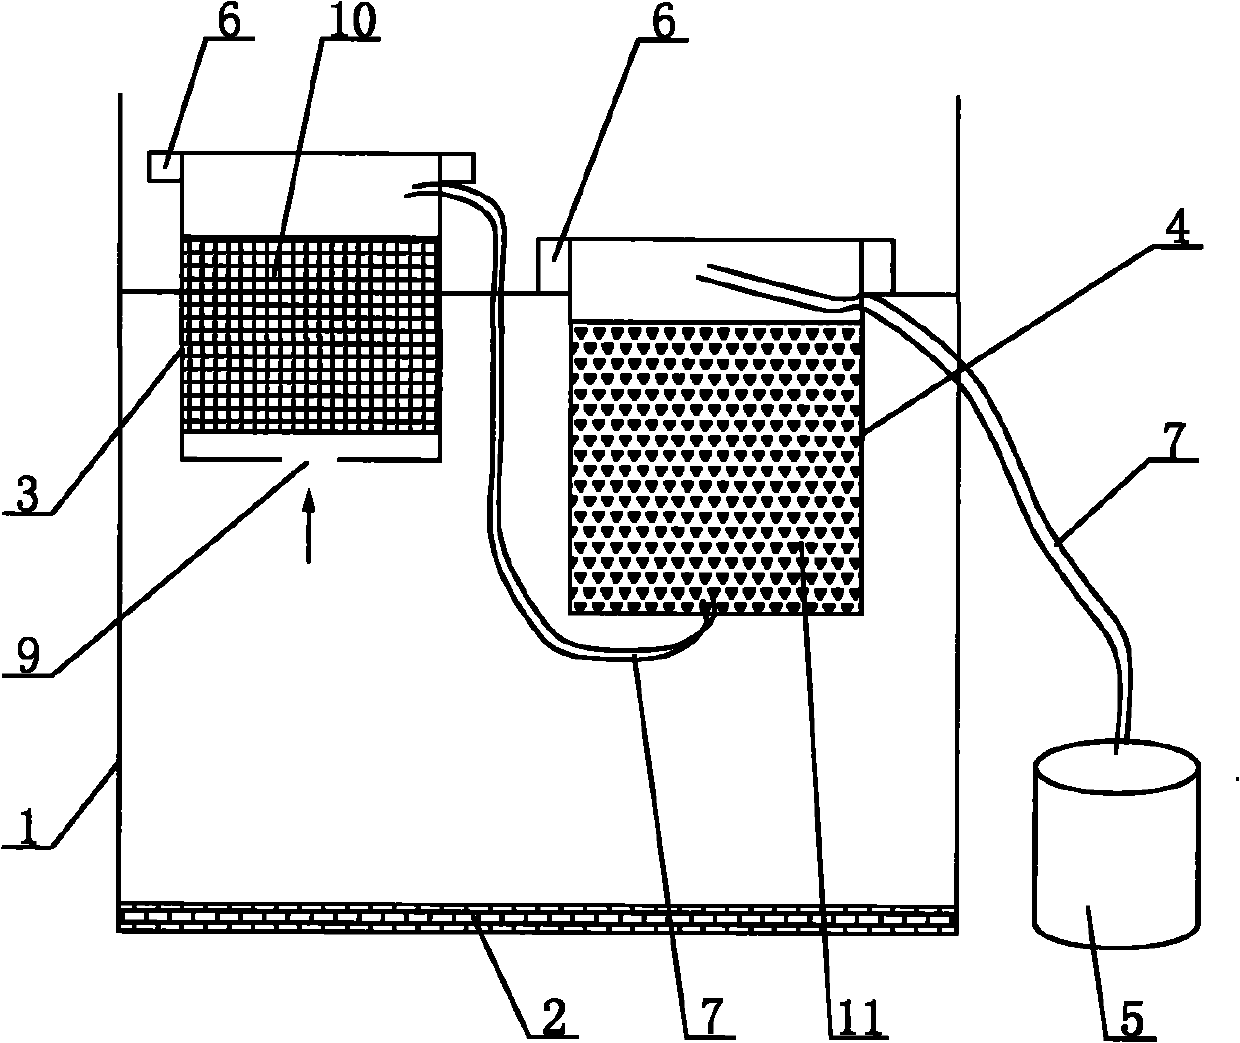 Novel water purifying plant and water purifying method